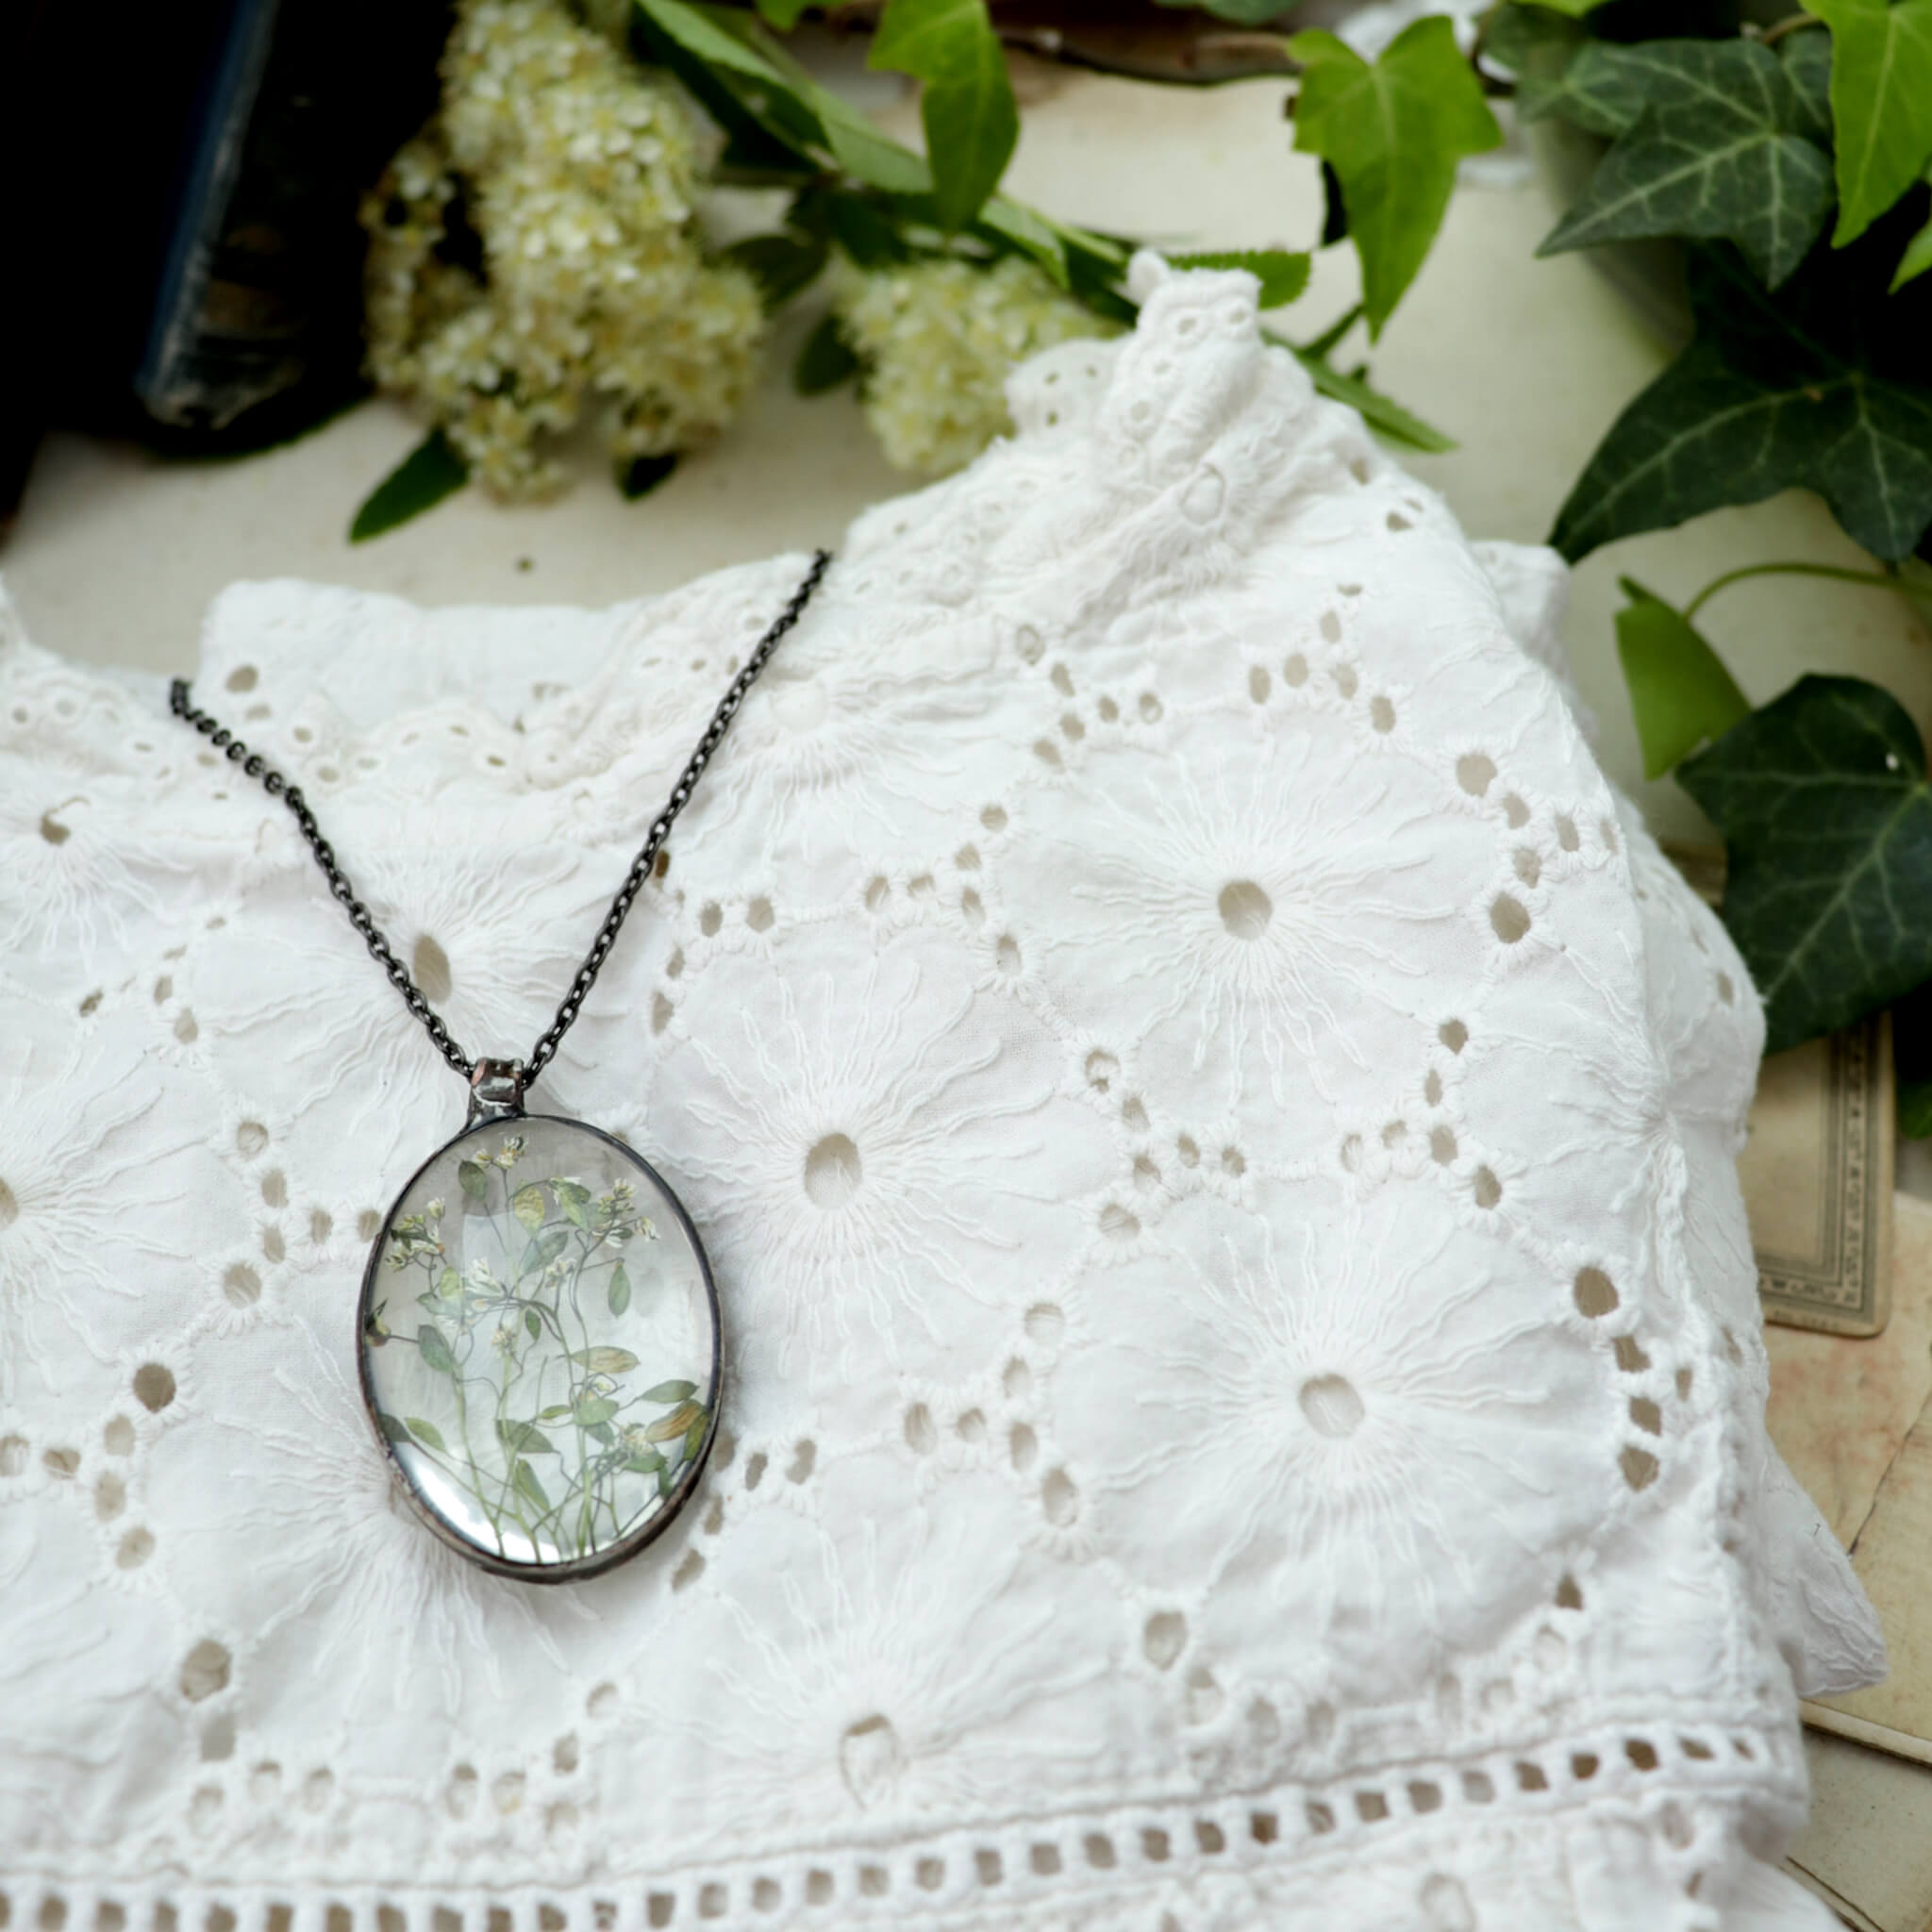  Big glass necklace with some flowers inside it lying on a white blouse